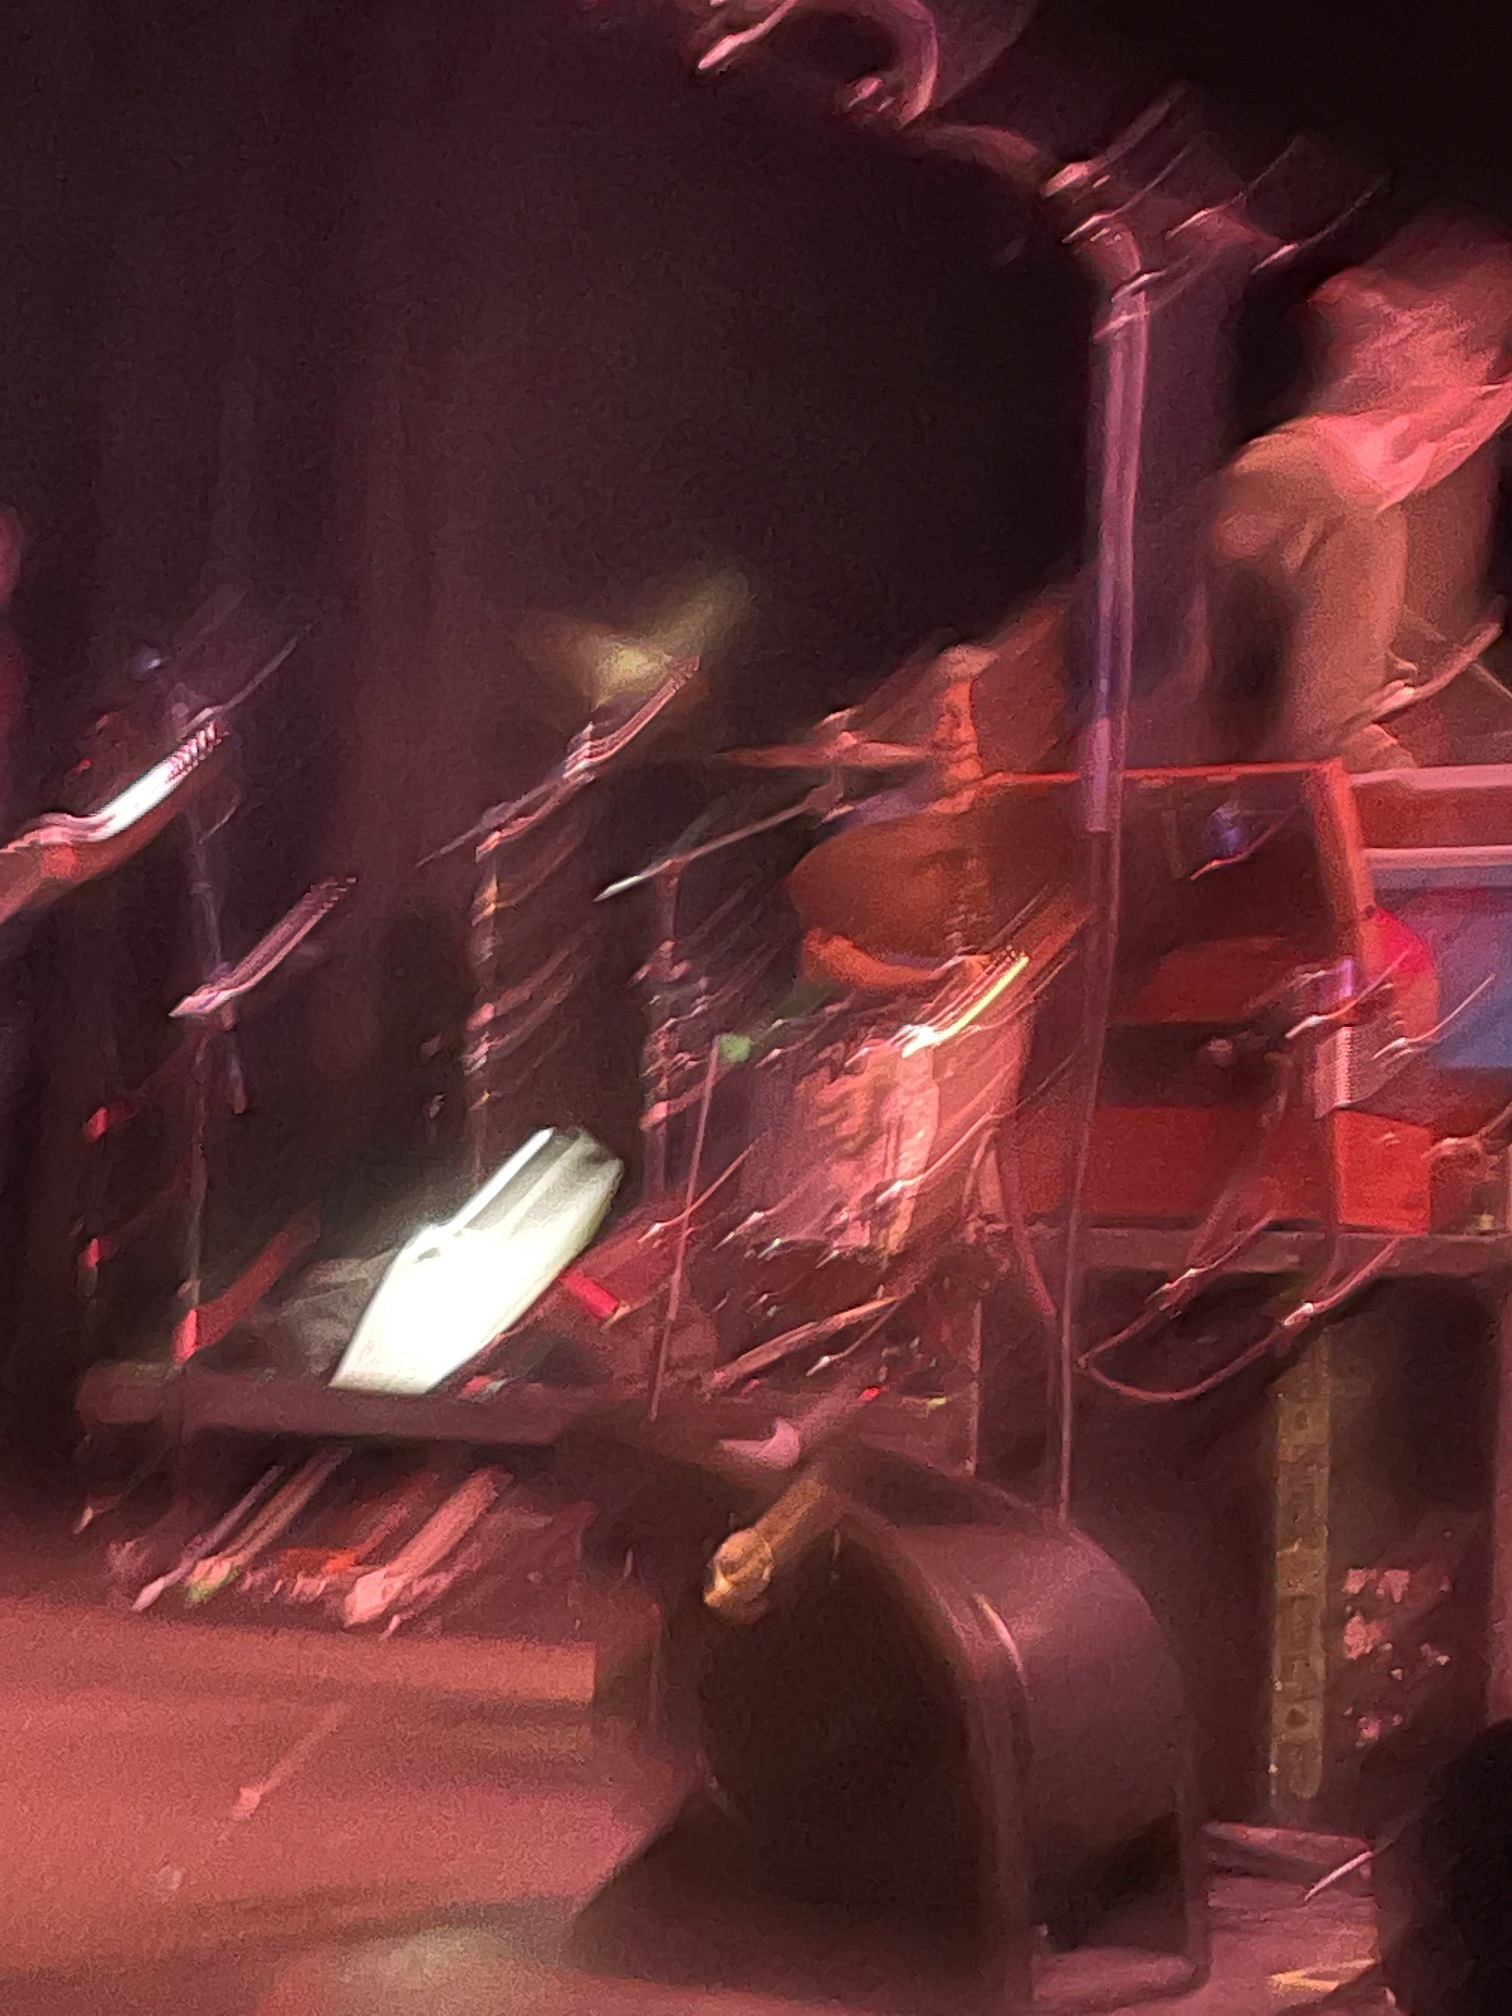 A blurry photo of John Linnell and Marty Beller on stage at their instruments.